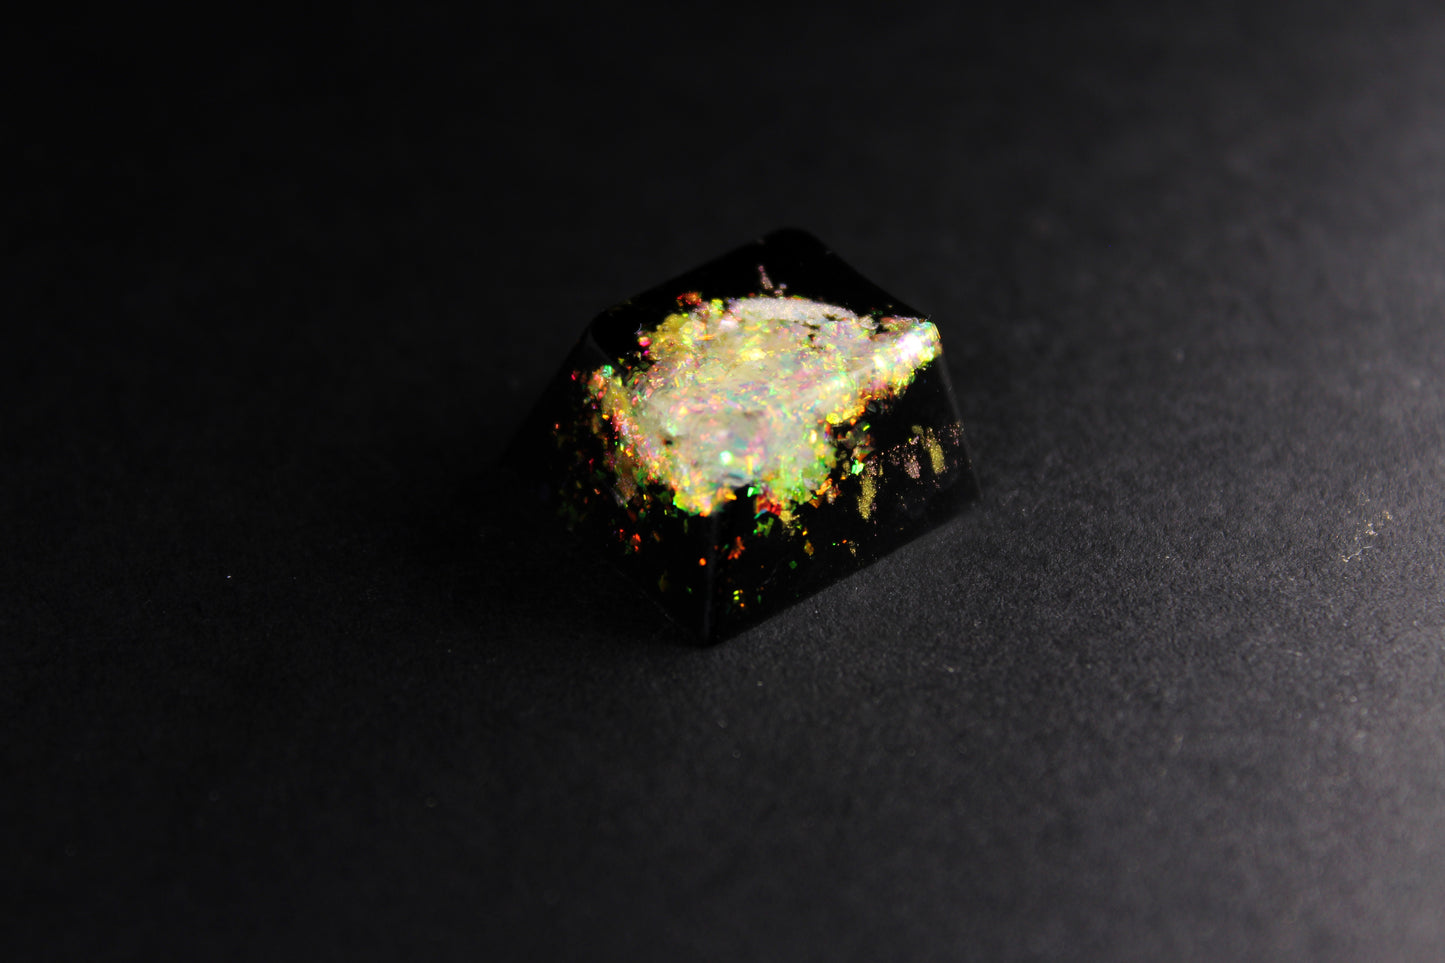 Cherry Esc - Fire Teaser 2 - PrimeCaps Keycap - Blank and Sculpted Artisan Keycaps for cherry MX mechanical keyboards 